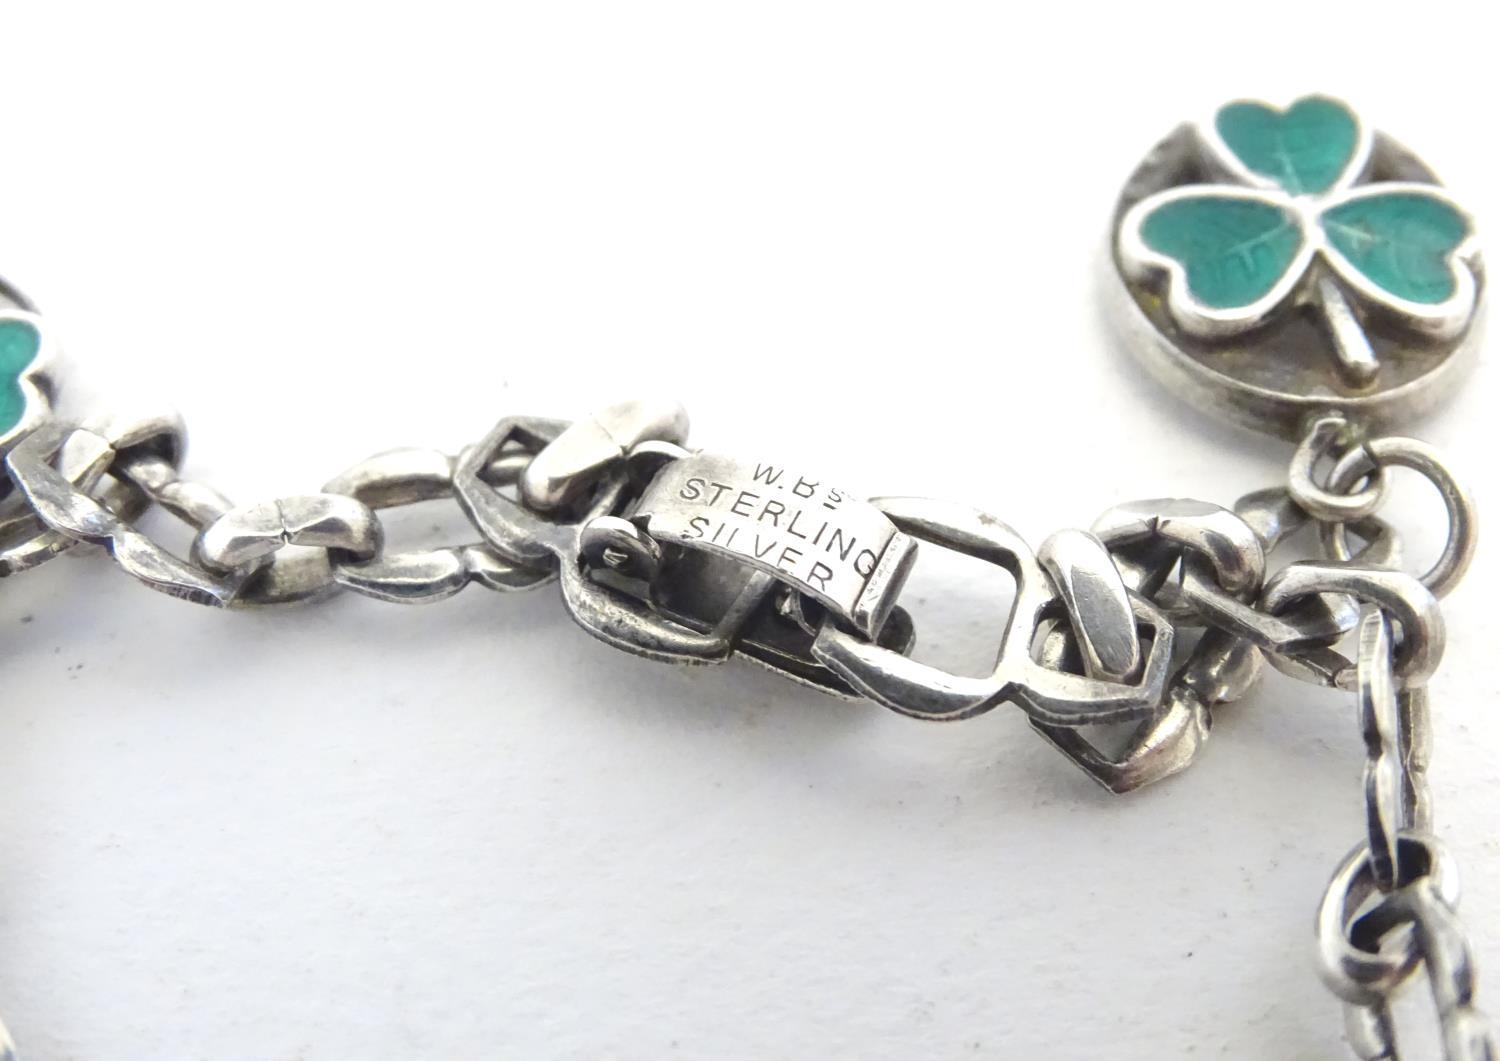 A silver charm bracelet set with various charms including horseshoe, horsehead and horseshoe and - Image 6 of 9